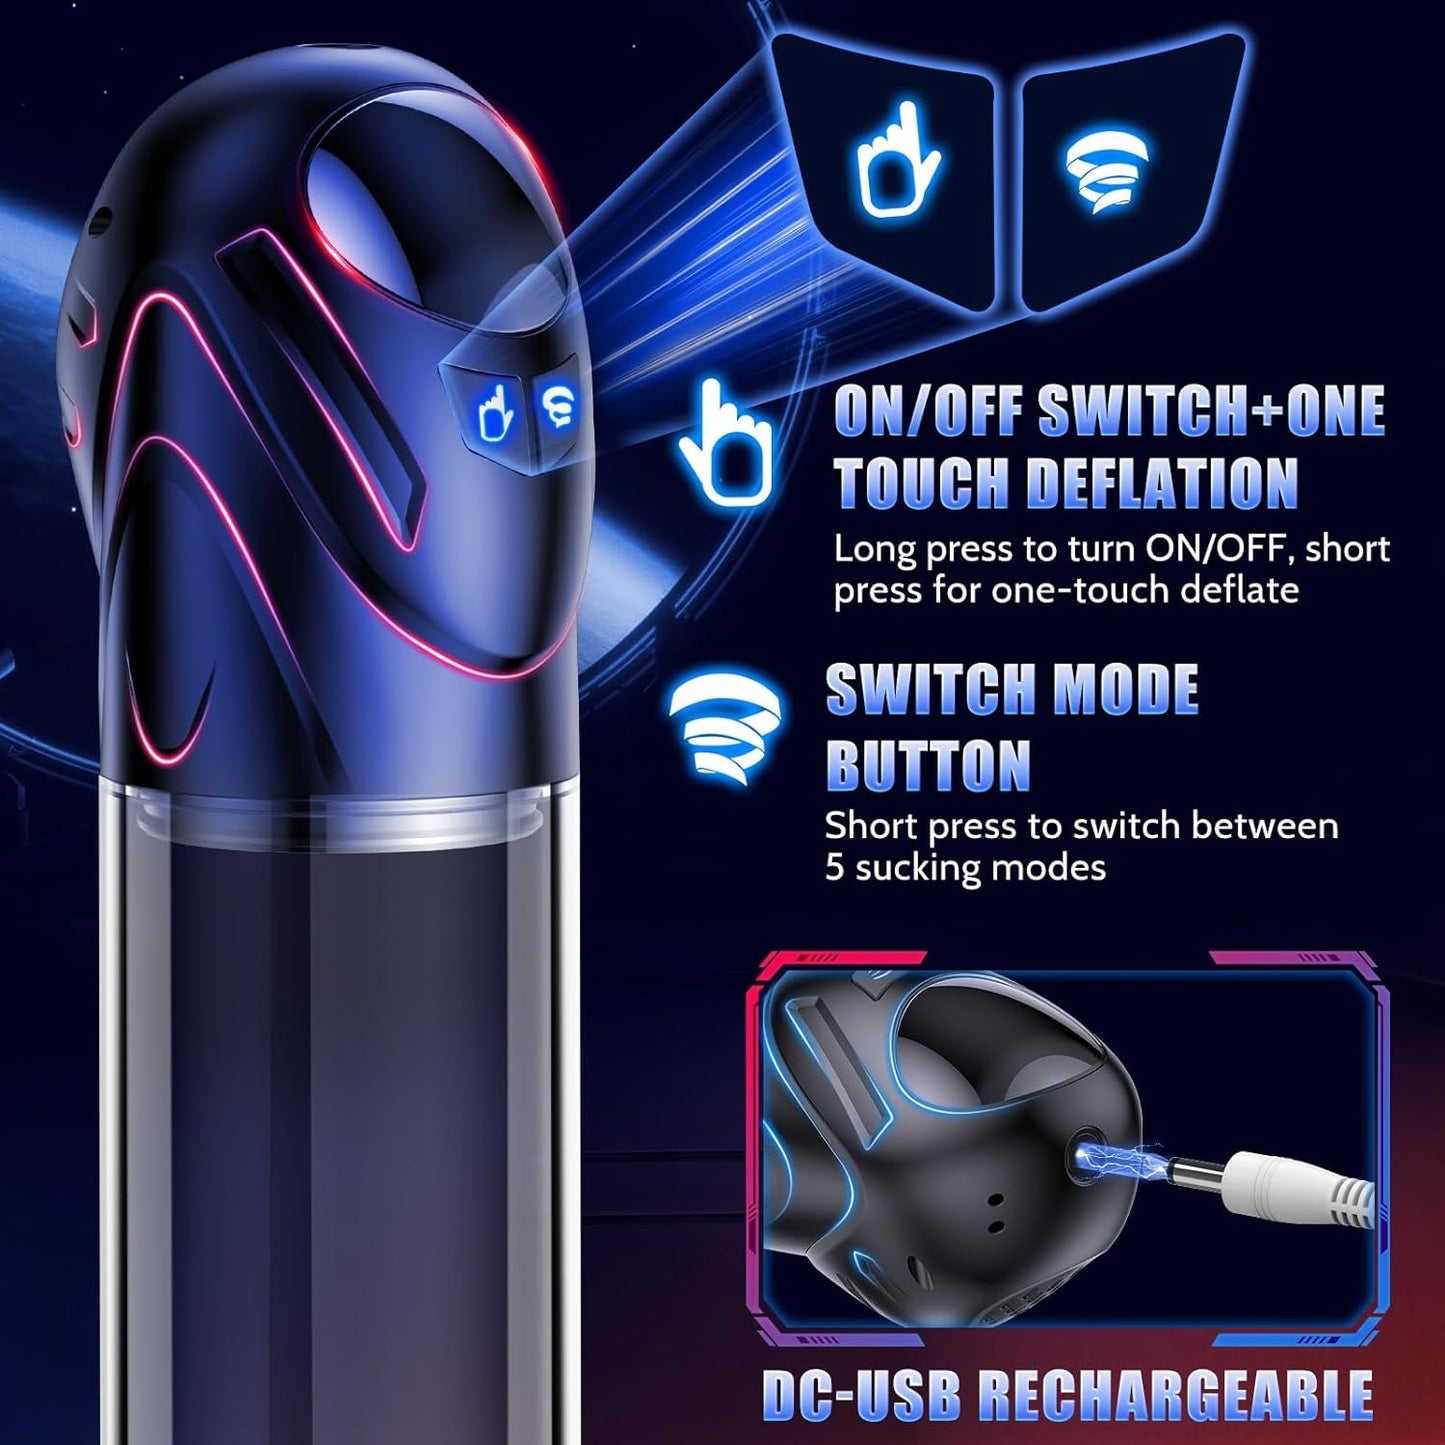 Premium Electric Penis Pump - 5 Suction Modes for Ultimate Pleasure, Penis Enlargement with 2 ED Cock Rings, Ideal for Men and Couples